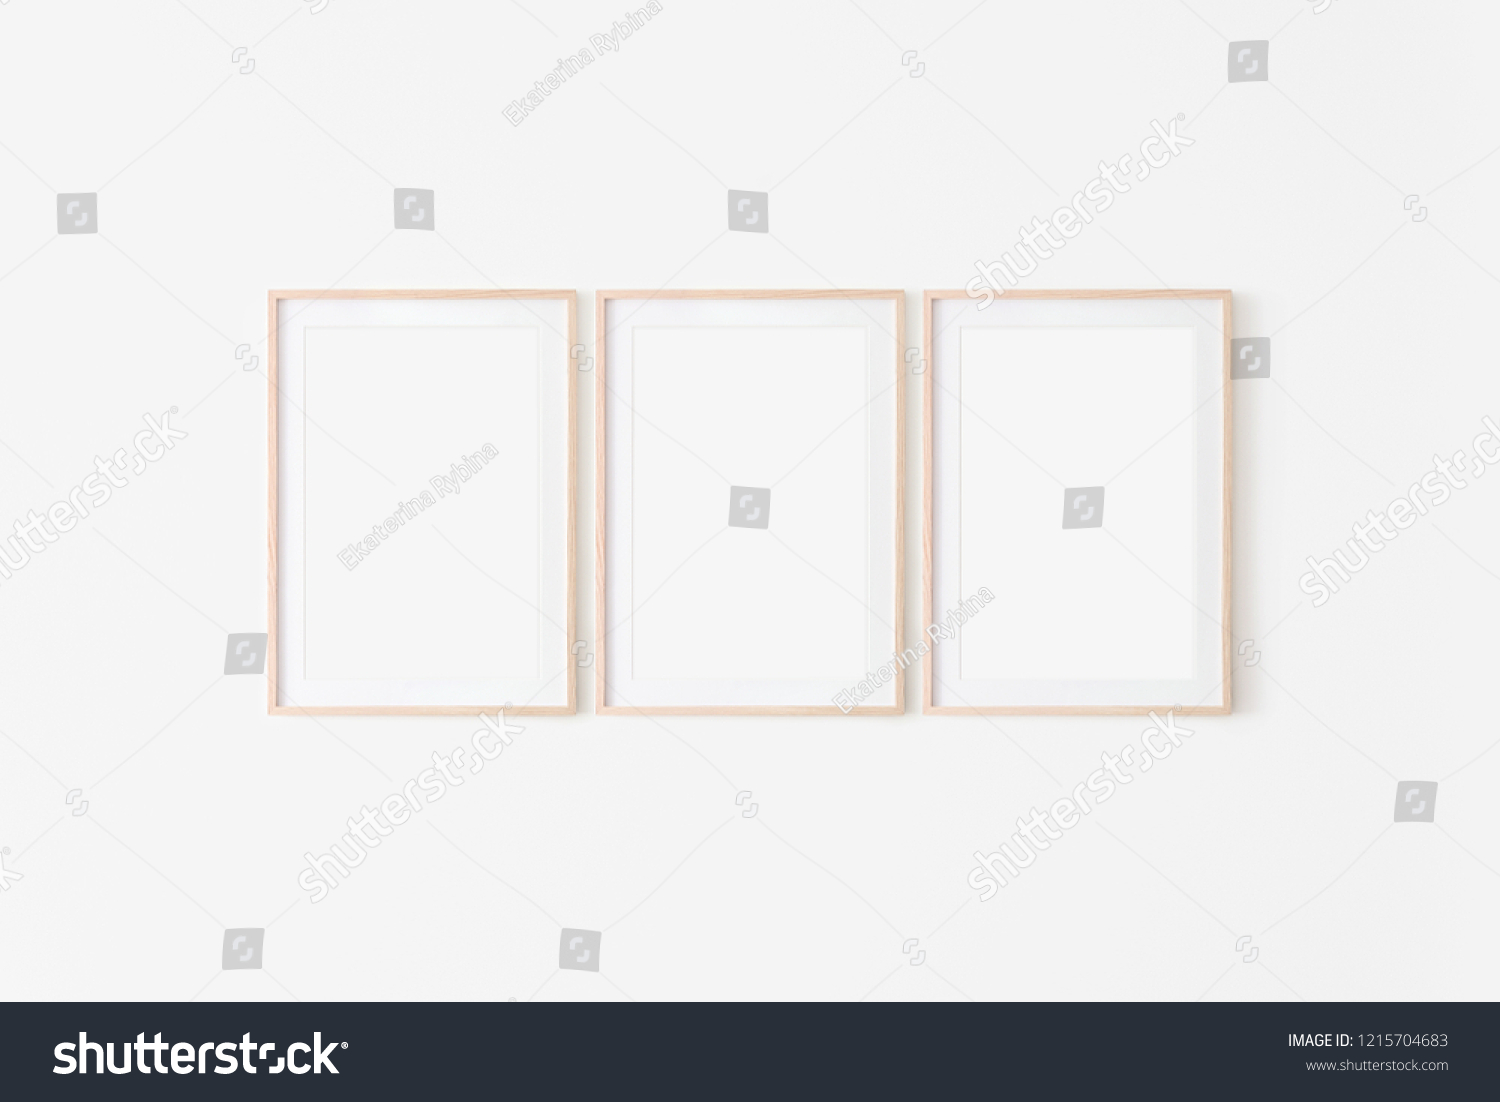 Set of three large 50x70, 20x28, a3,a4, Wooden frame mockup with backing board on white wall. Poster mockup. Clean, modern, minimal frame. Empty fra.me Indoor interior, show text or product #1215704683